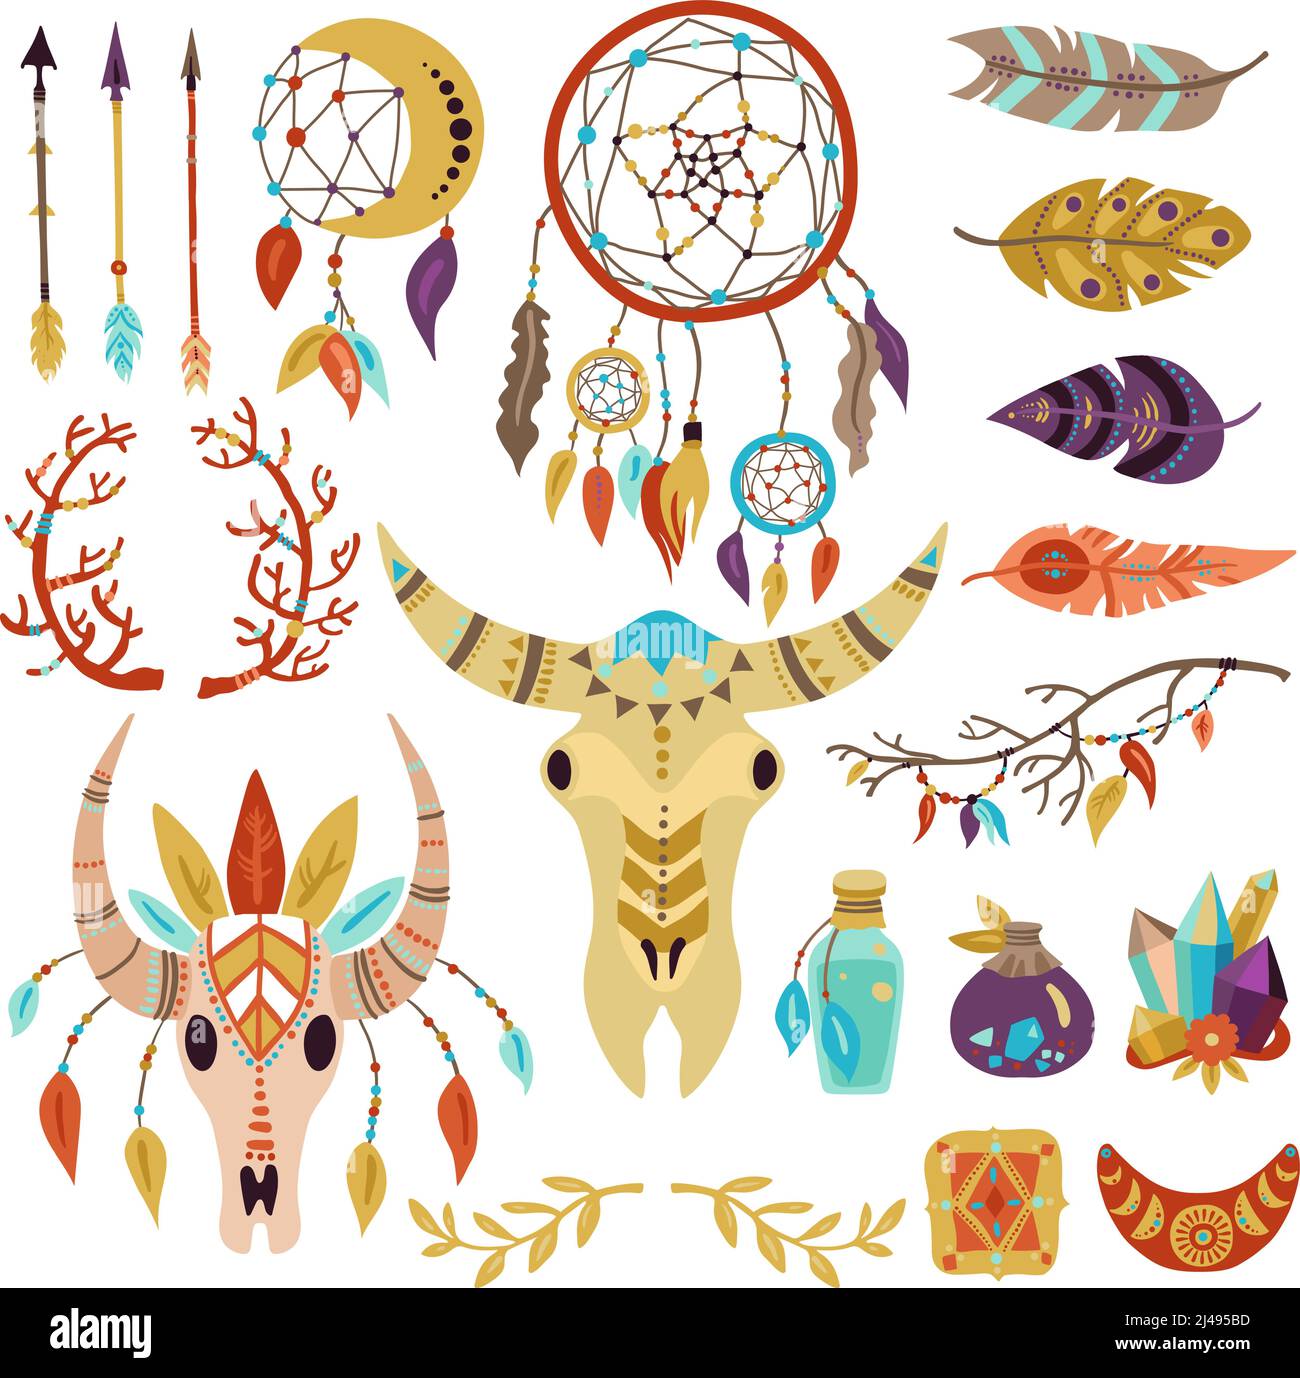 Boho symbols decorative elements collection with dream catcher feathers twigs arrows crystals buffalo head isolated vector illustration Stock Vector